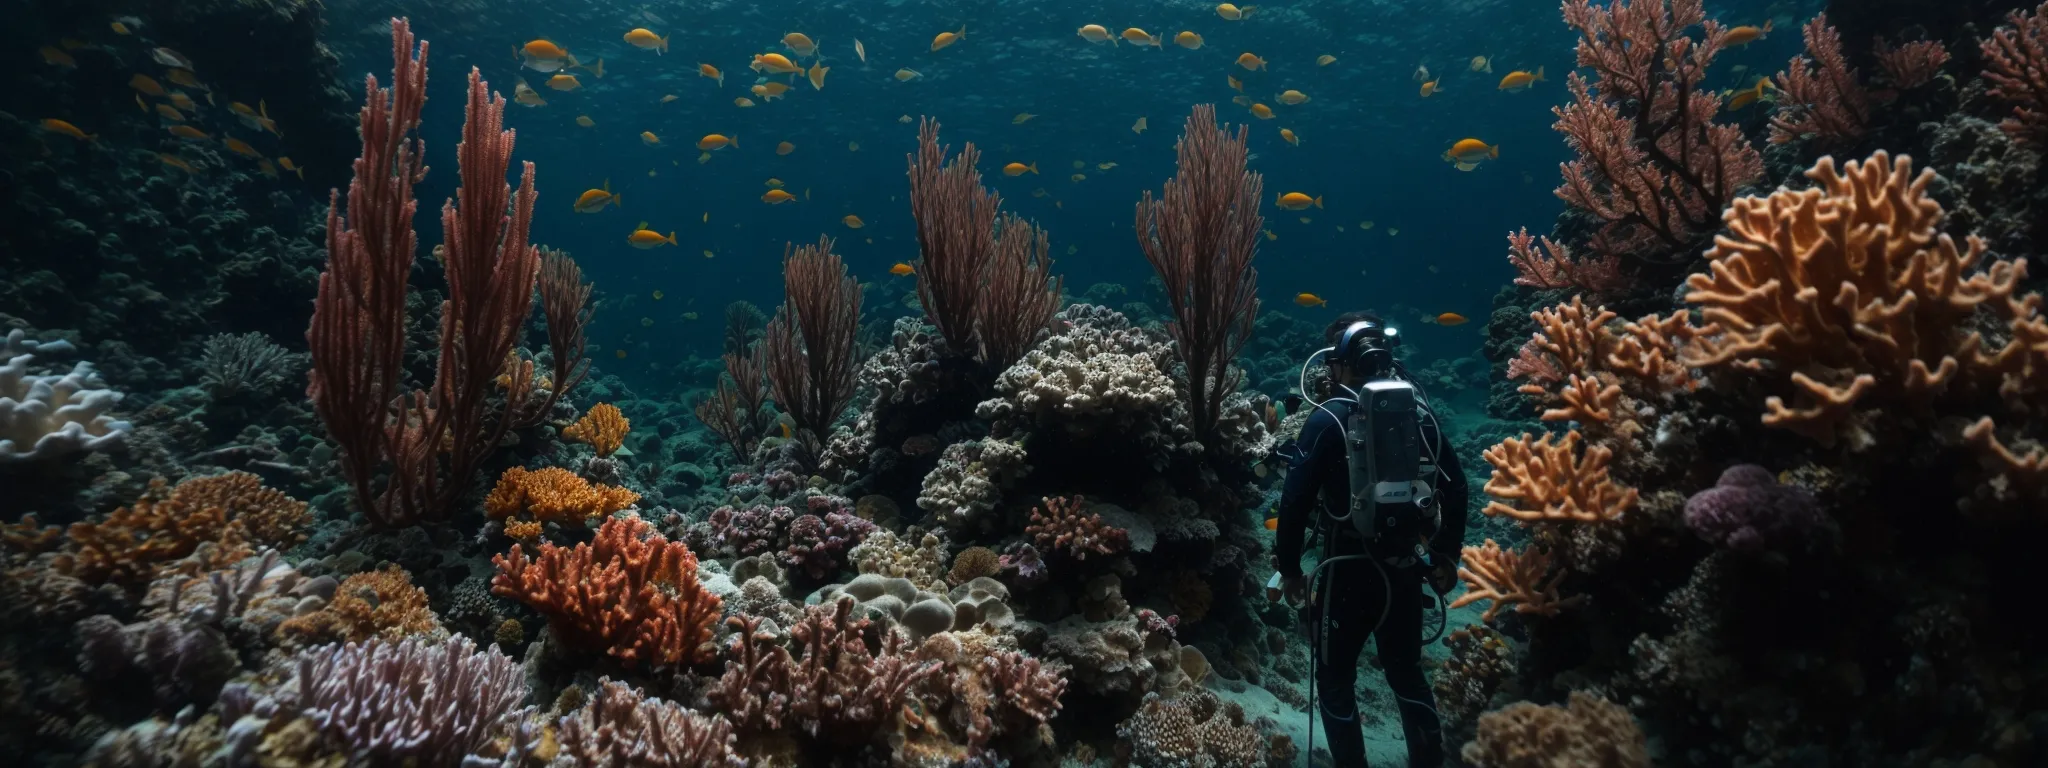 a deep-sea diver amidst a vast coral reef, symbolizing the search for valuable keywords within the ocean of online data.